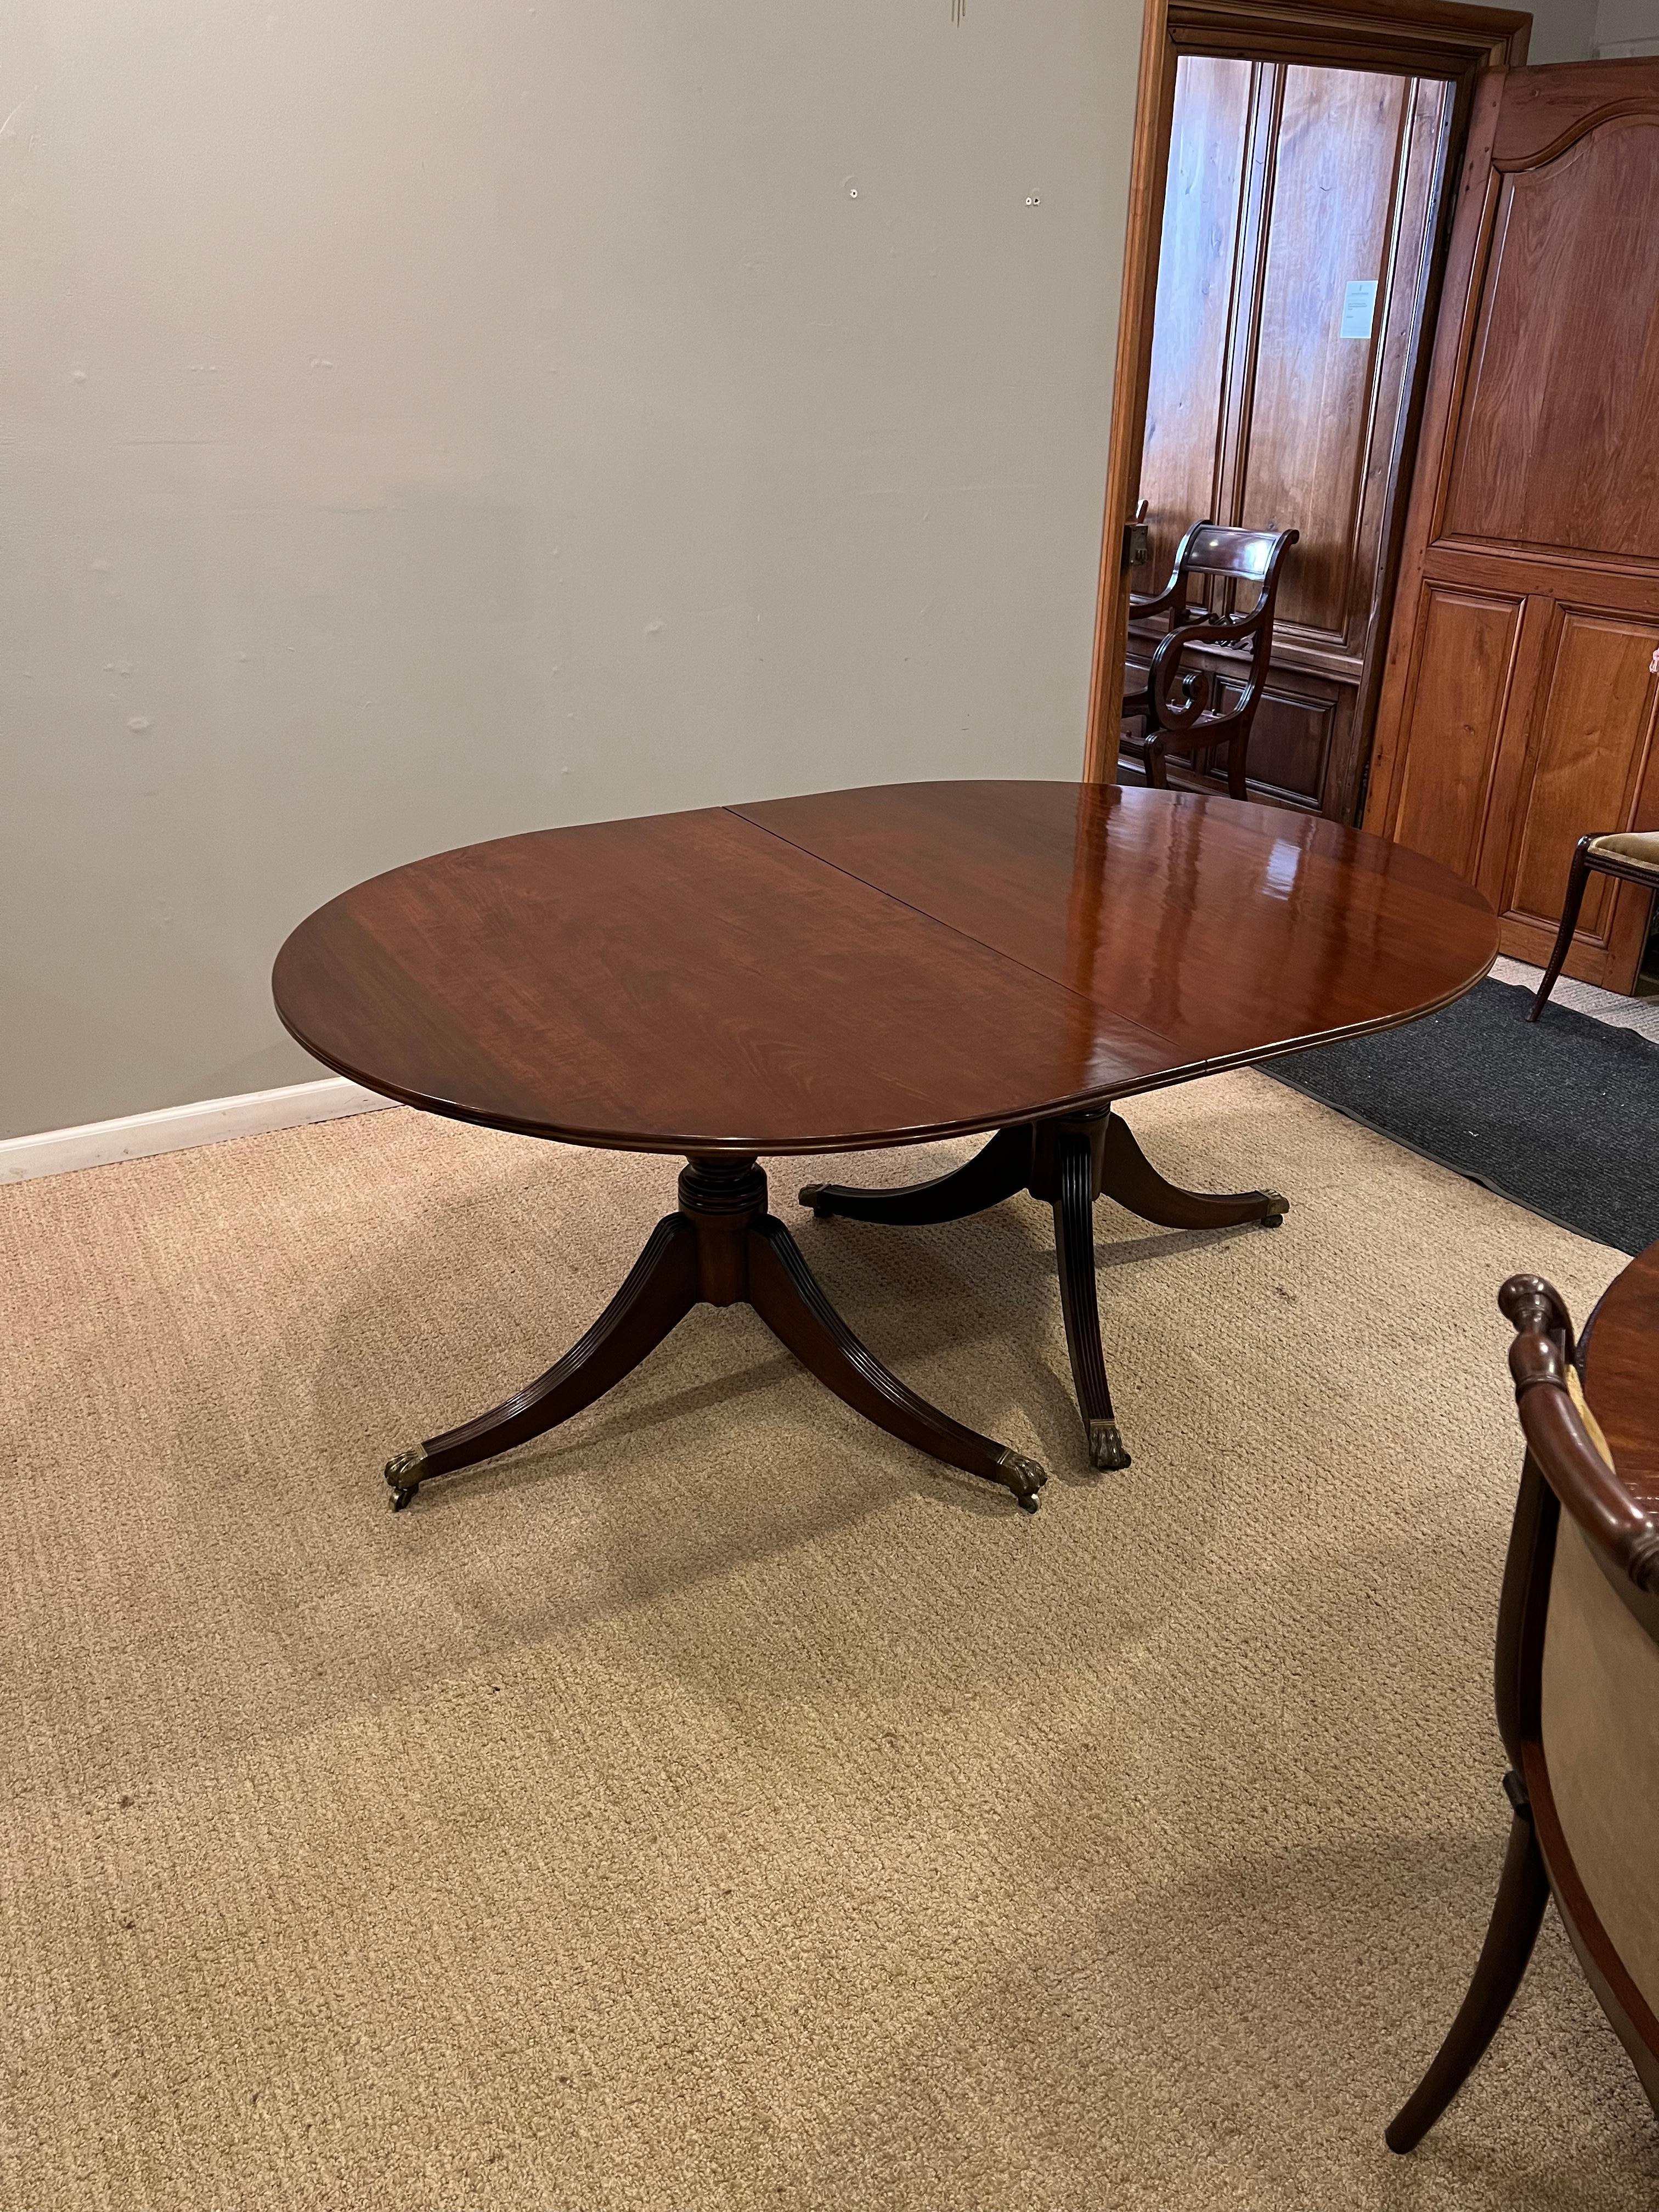 Brass George III Style Mahogany Dining Table. 2 pedestals 2 leaves 